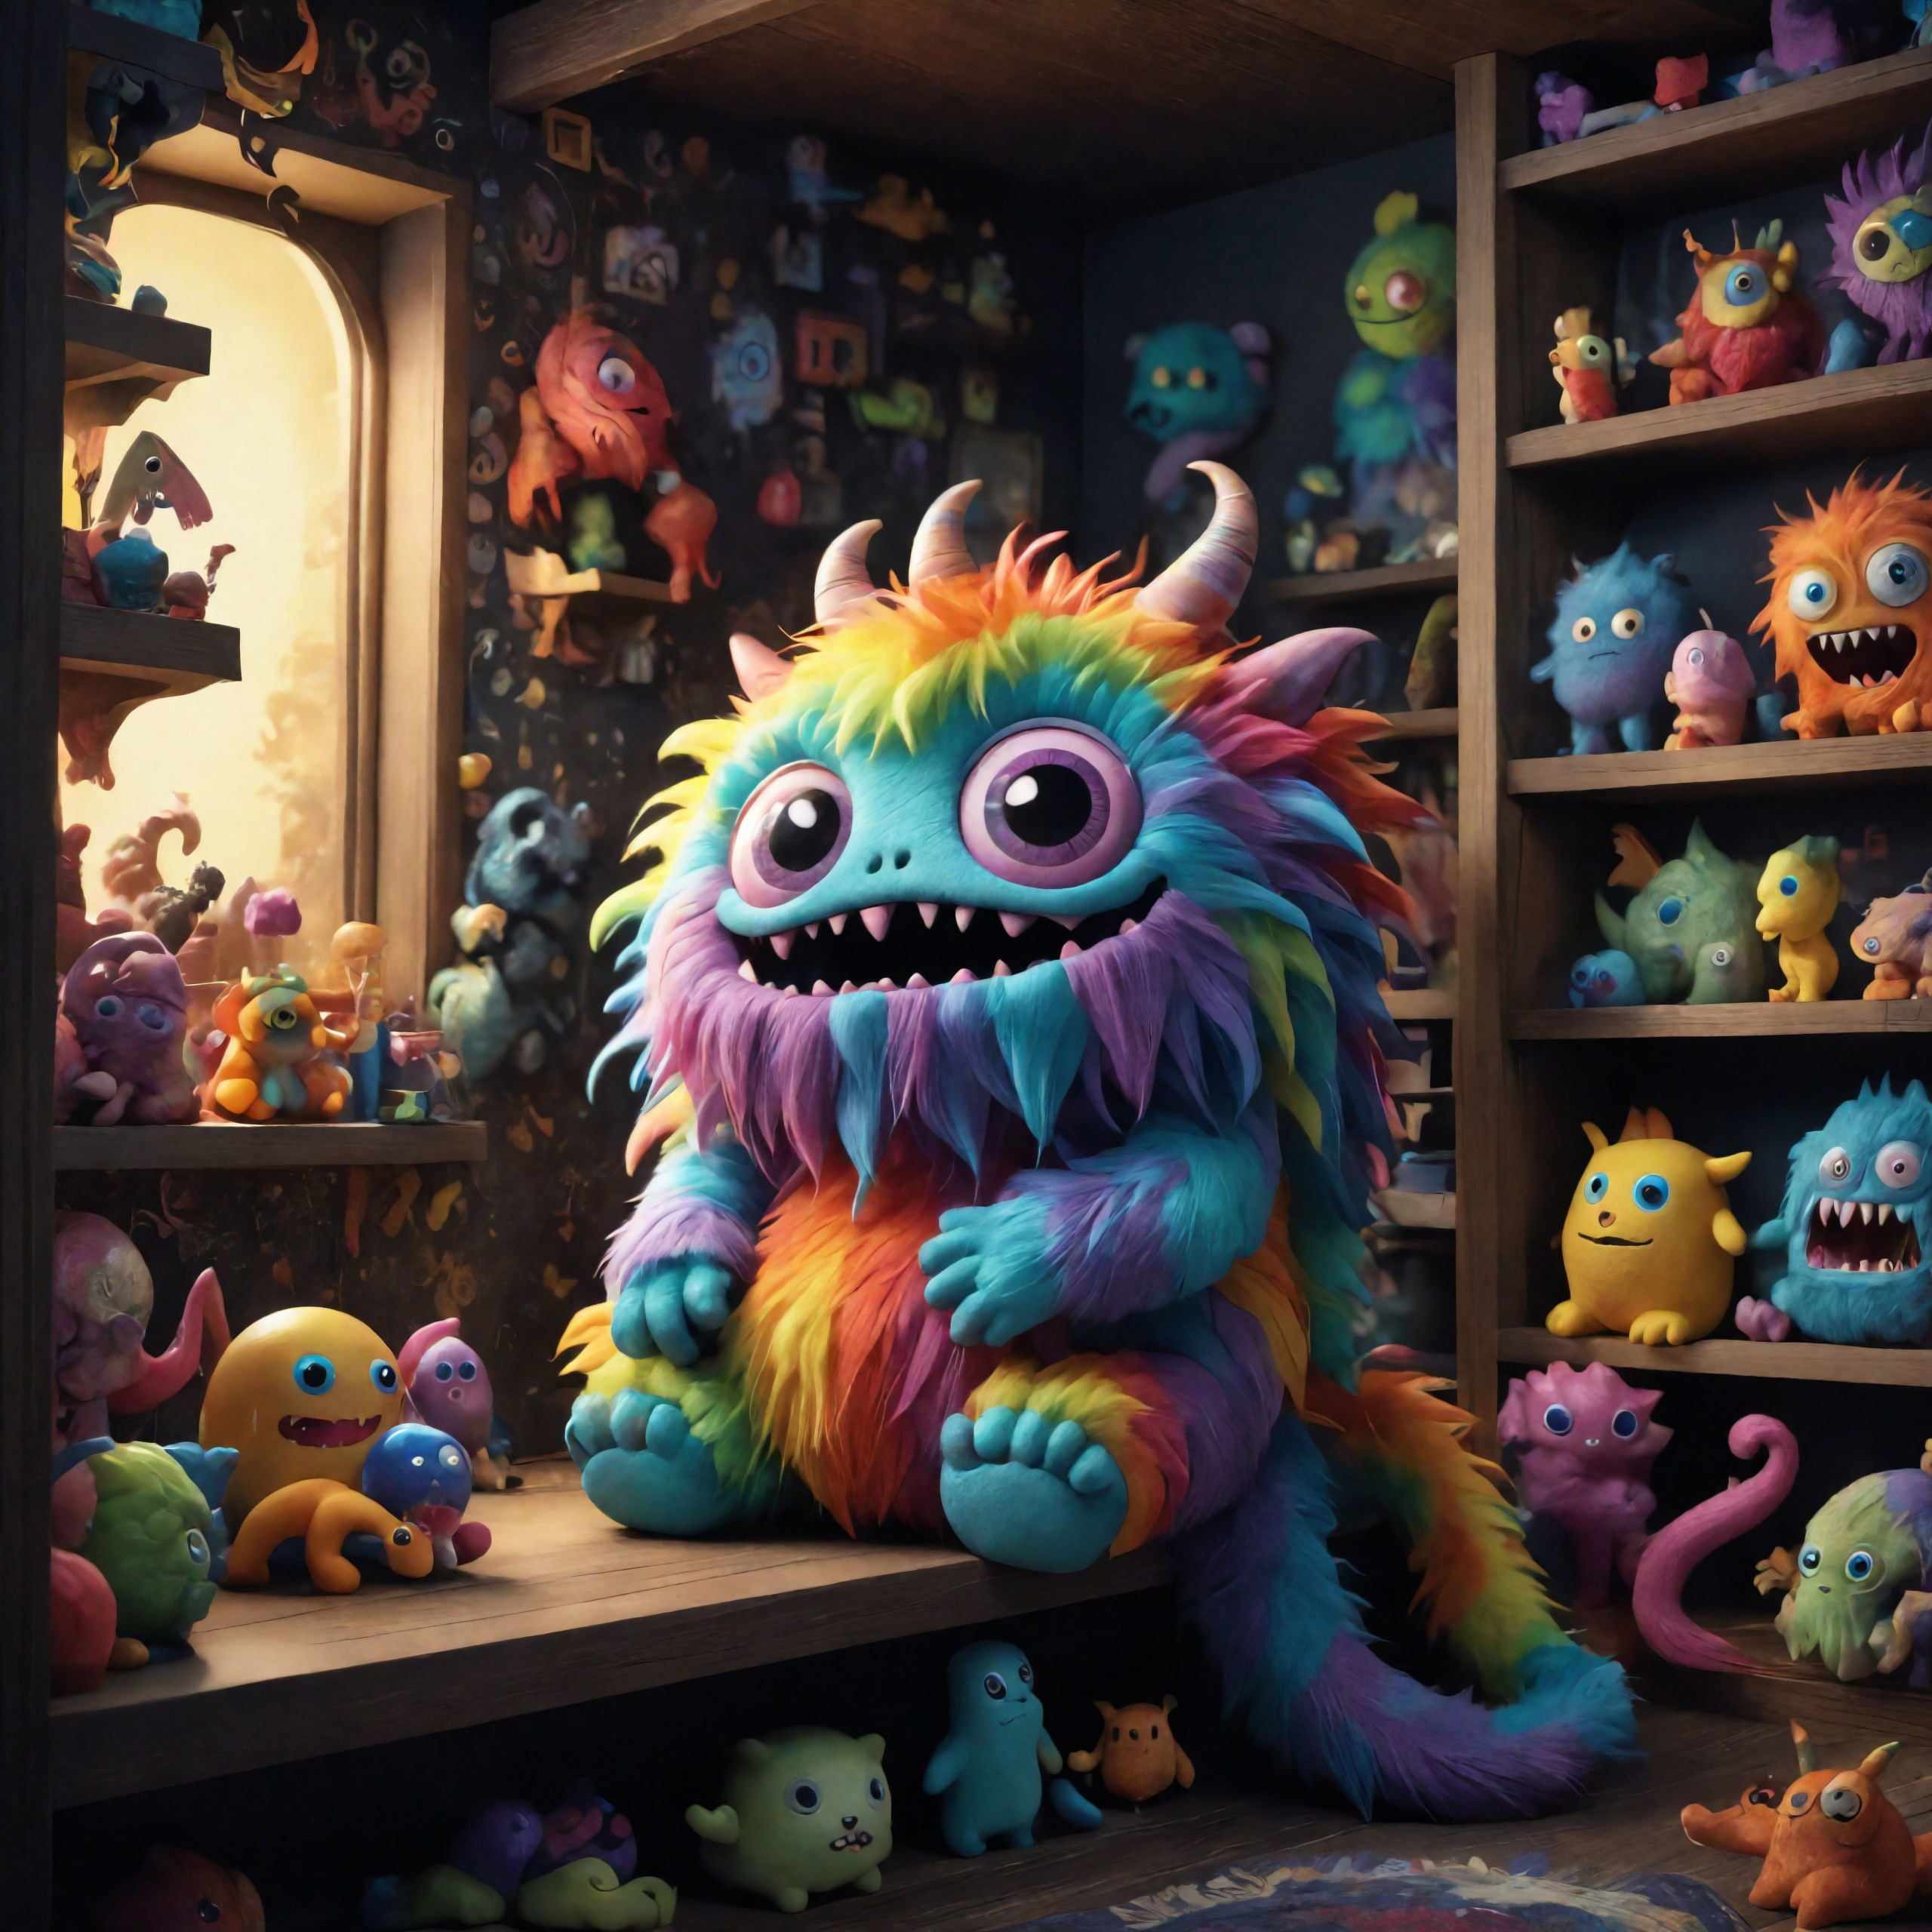 A colorful creature with a purple and orange face is sitting on a shelf surrounded by various other stuffed animals.